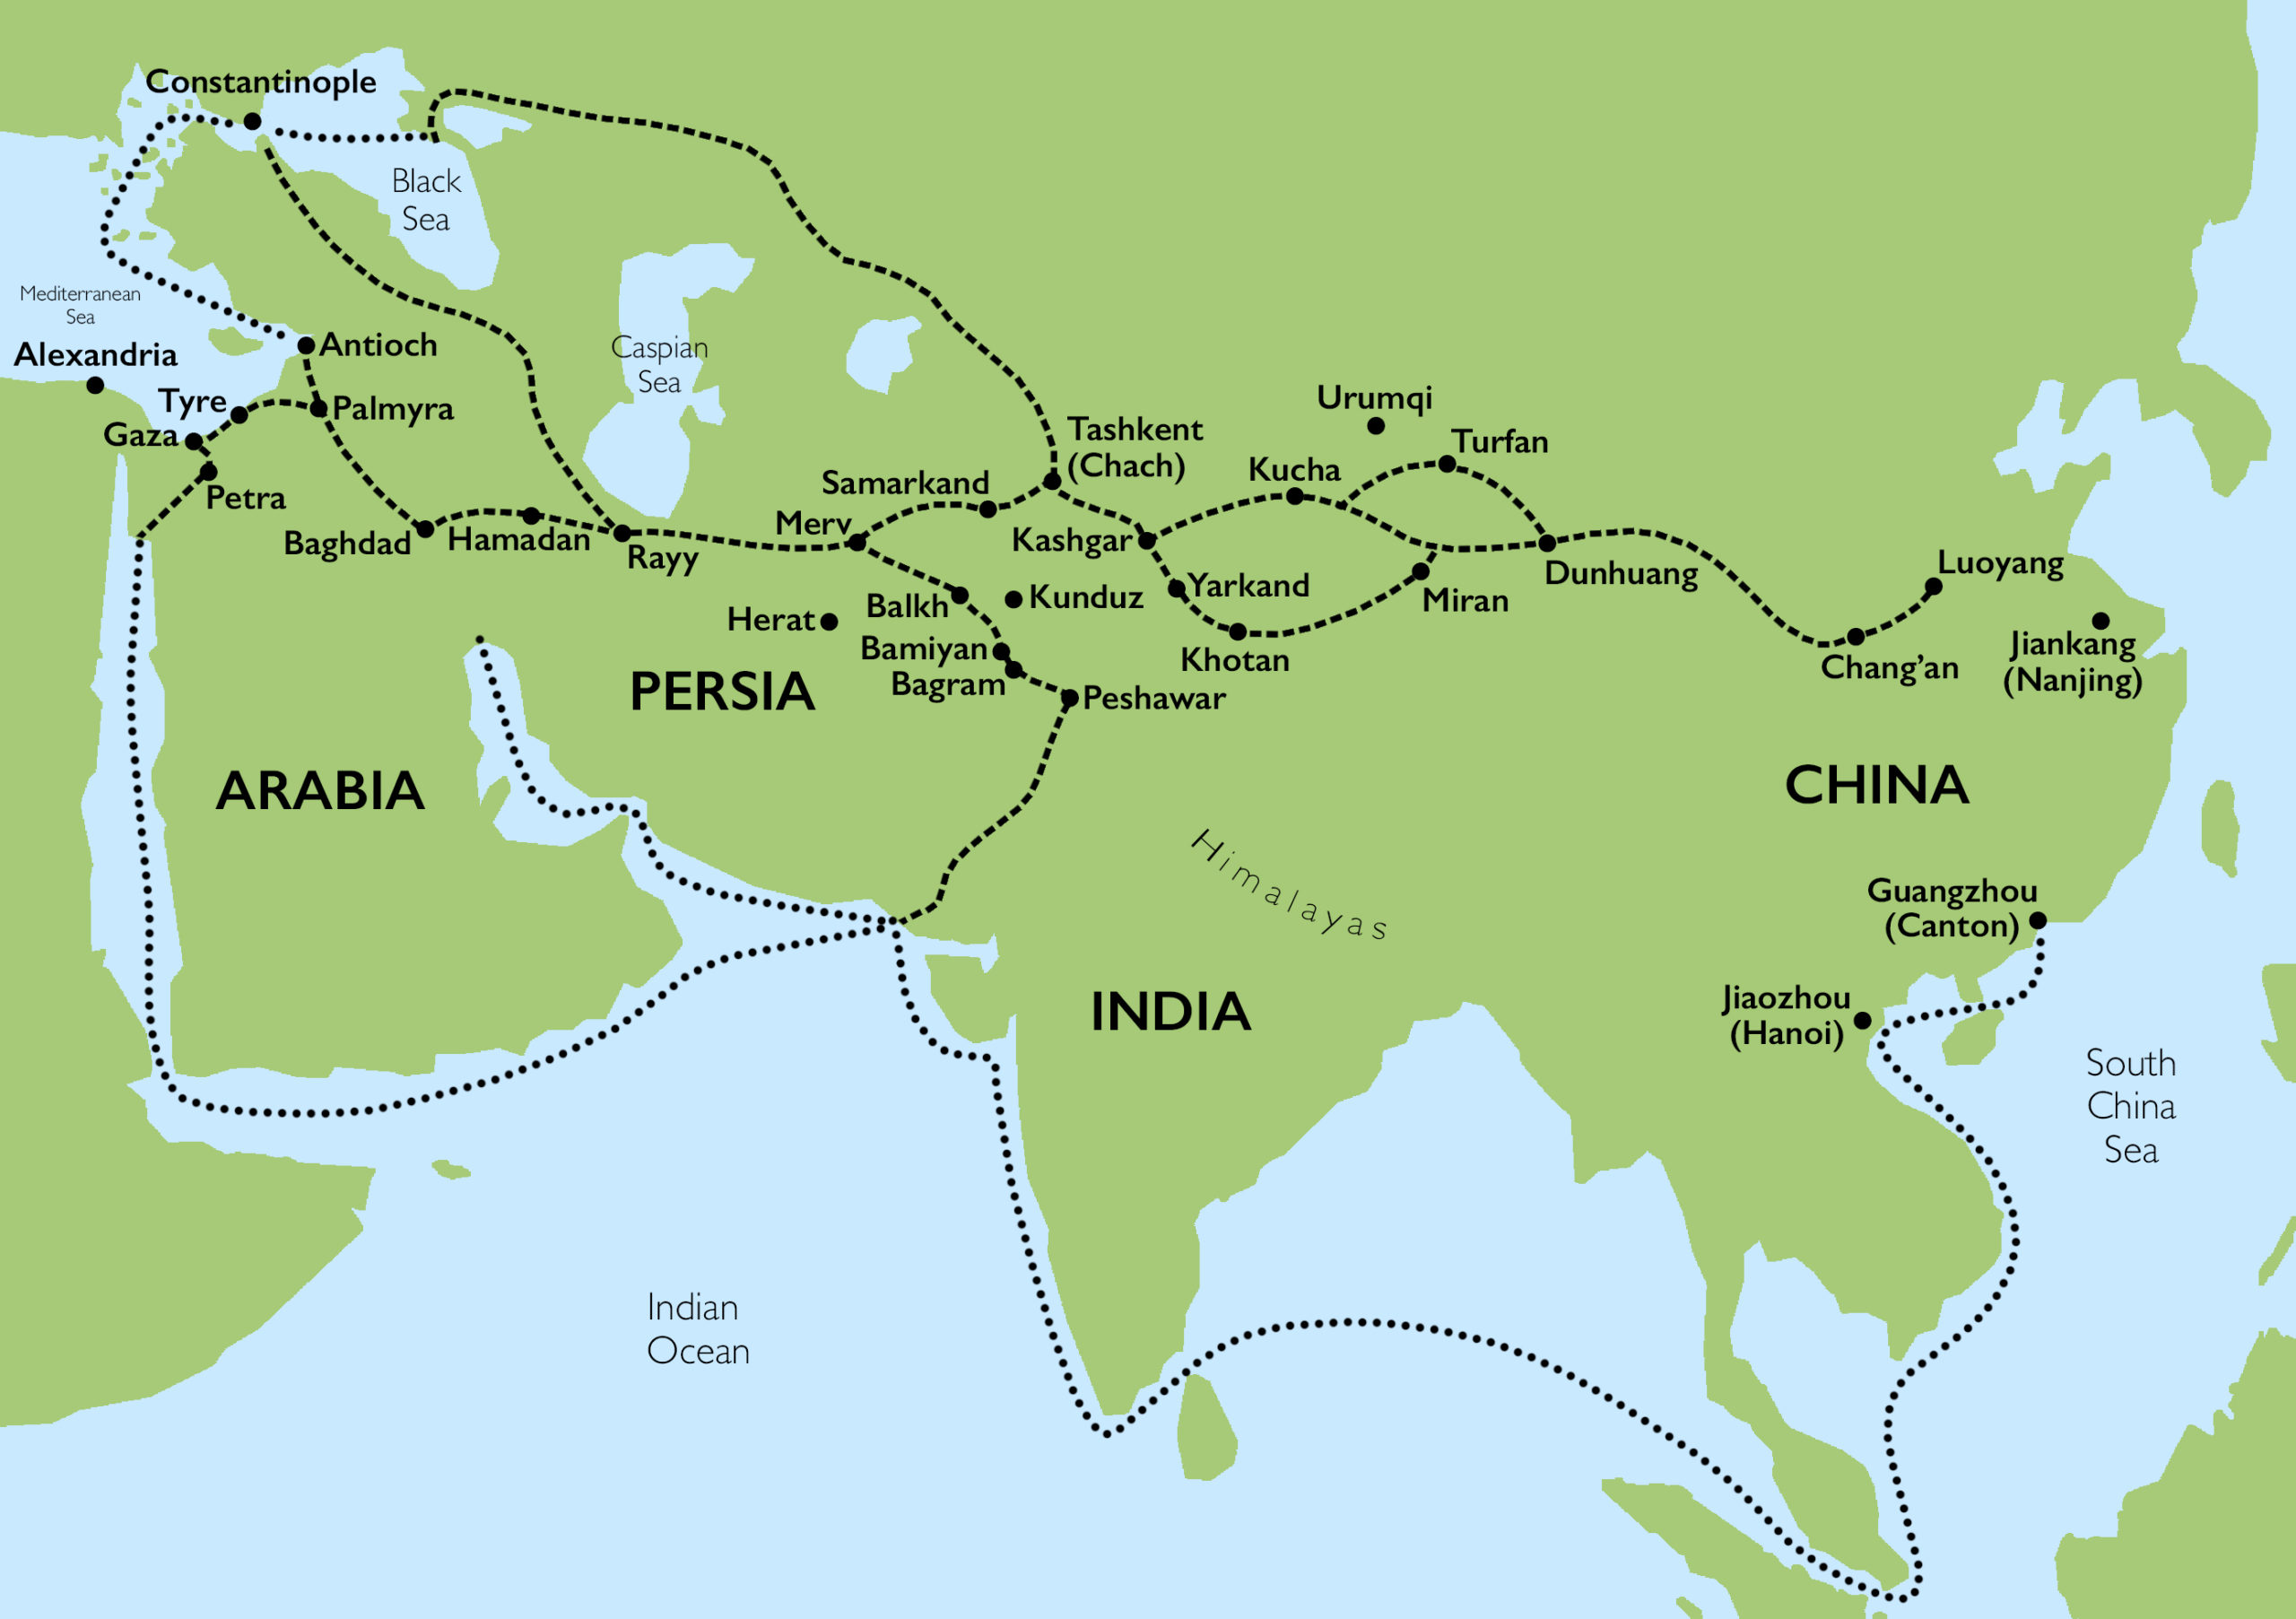 Map showing the trade routes that made up the Silk Roads (map by Evan Freeman, CC BY-NC-SA 2.0, adapted from Françoise Demange, Glass, Gilding, and Grand Design: Art of Sasanian Iran (224–642) (New York: Asia Society, 2007)